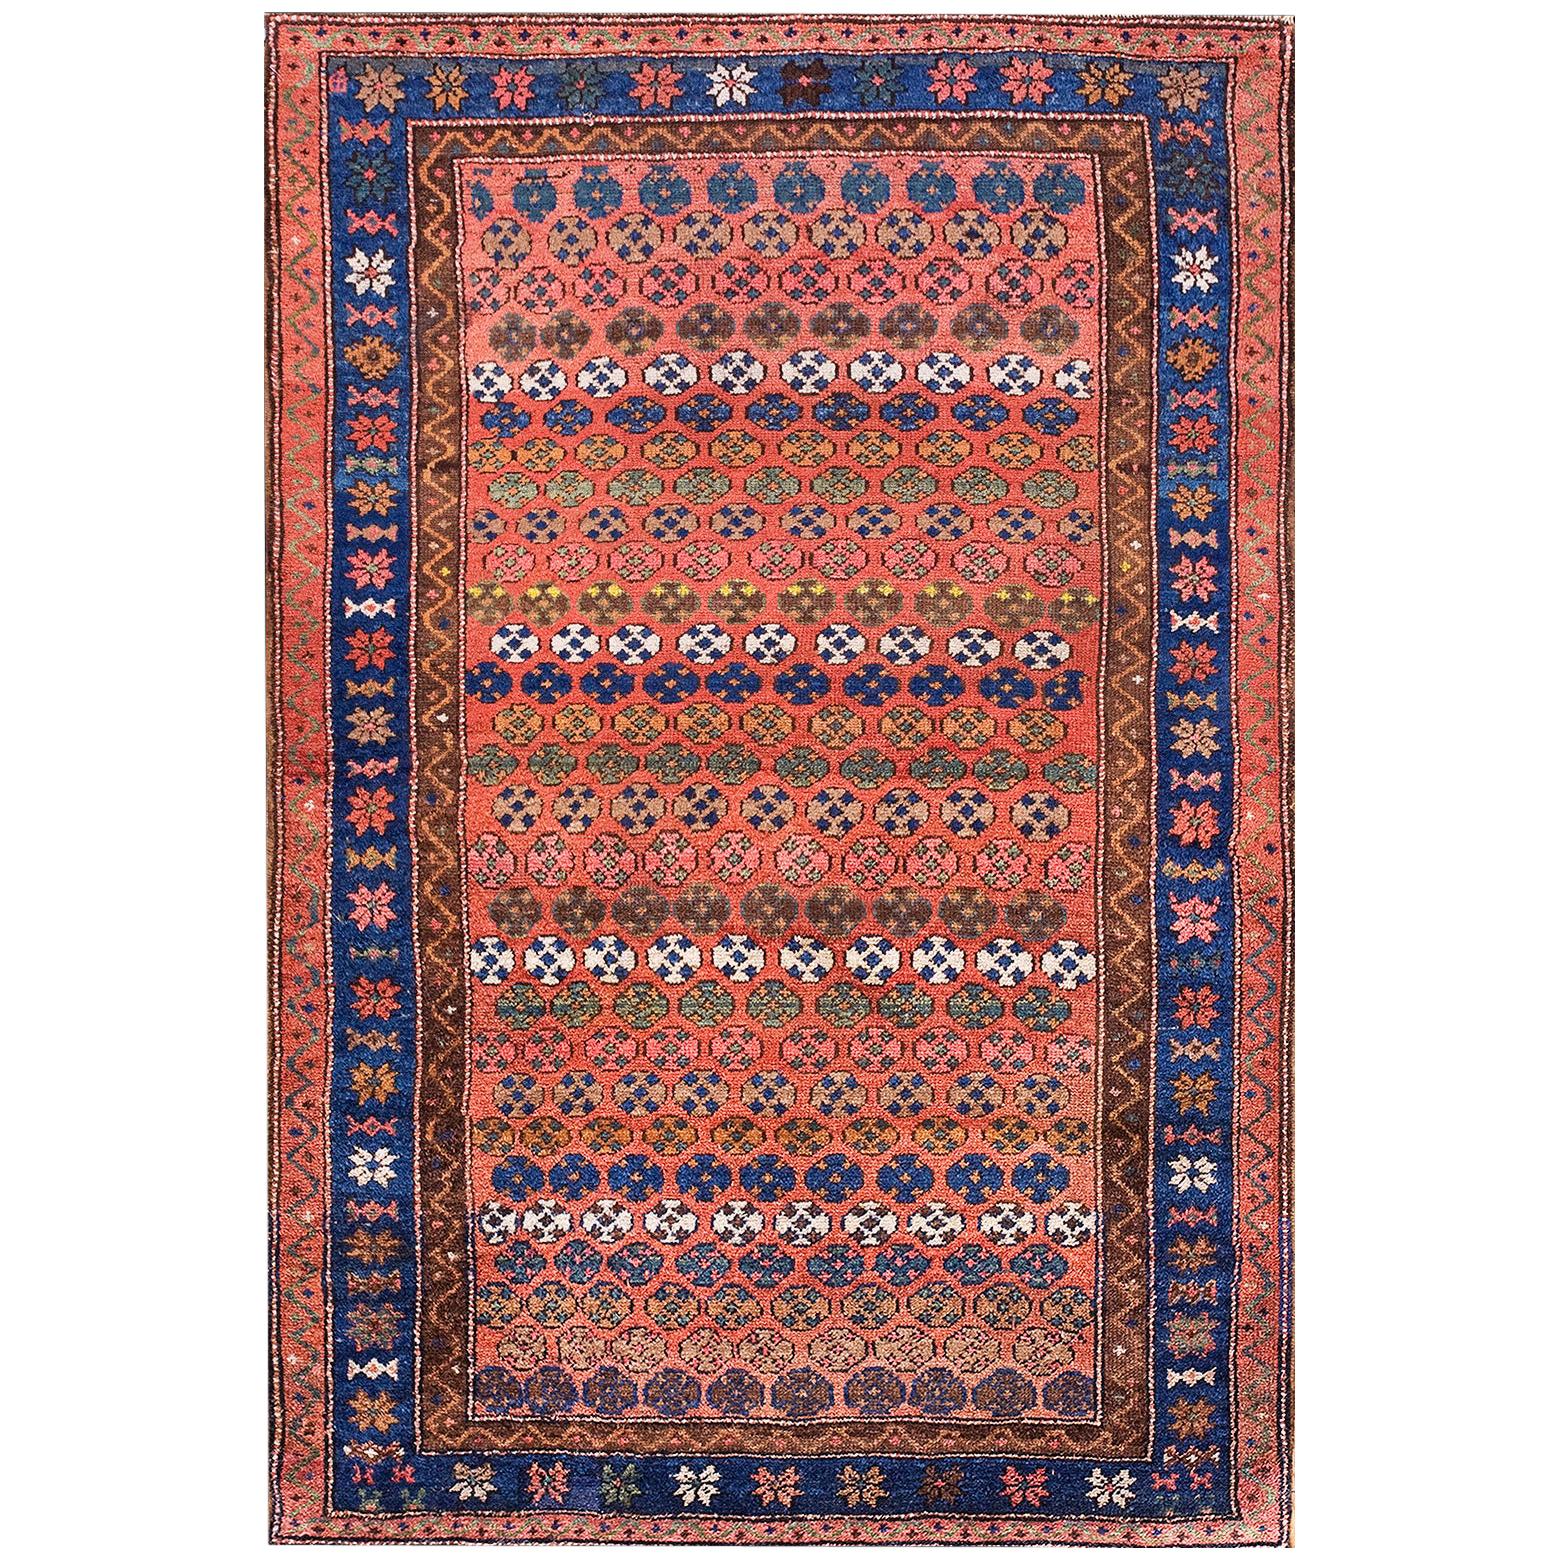 19th Century N.W. Persian Carpet ( 3'10" x 5'10" - 117 x 178 ) For Sale